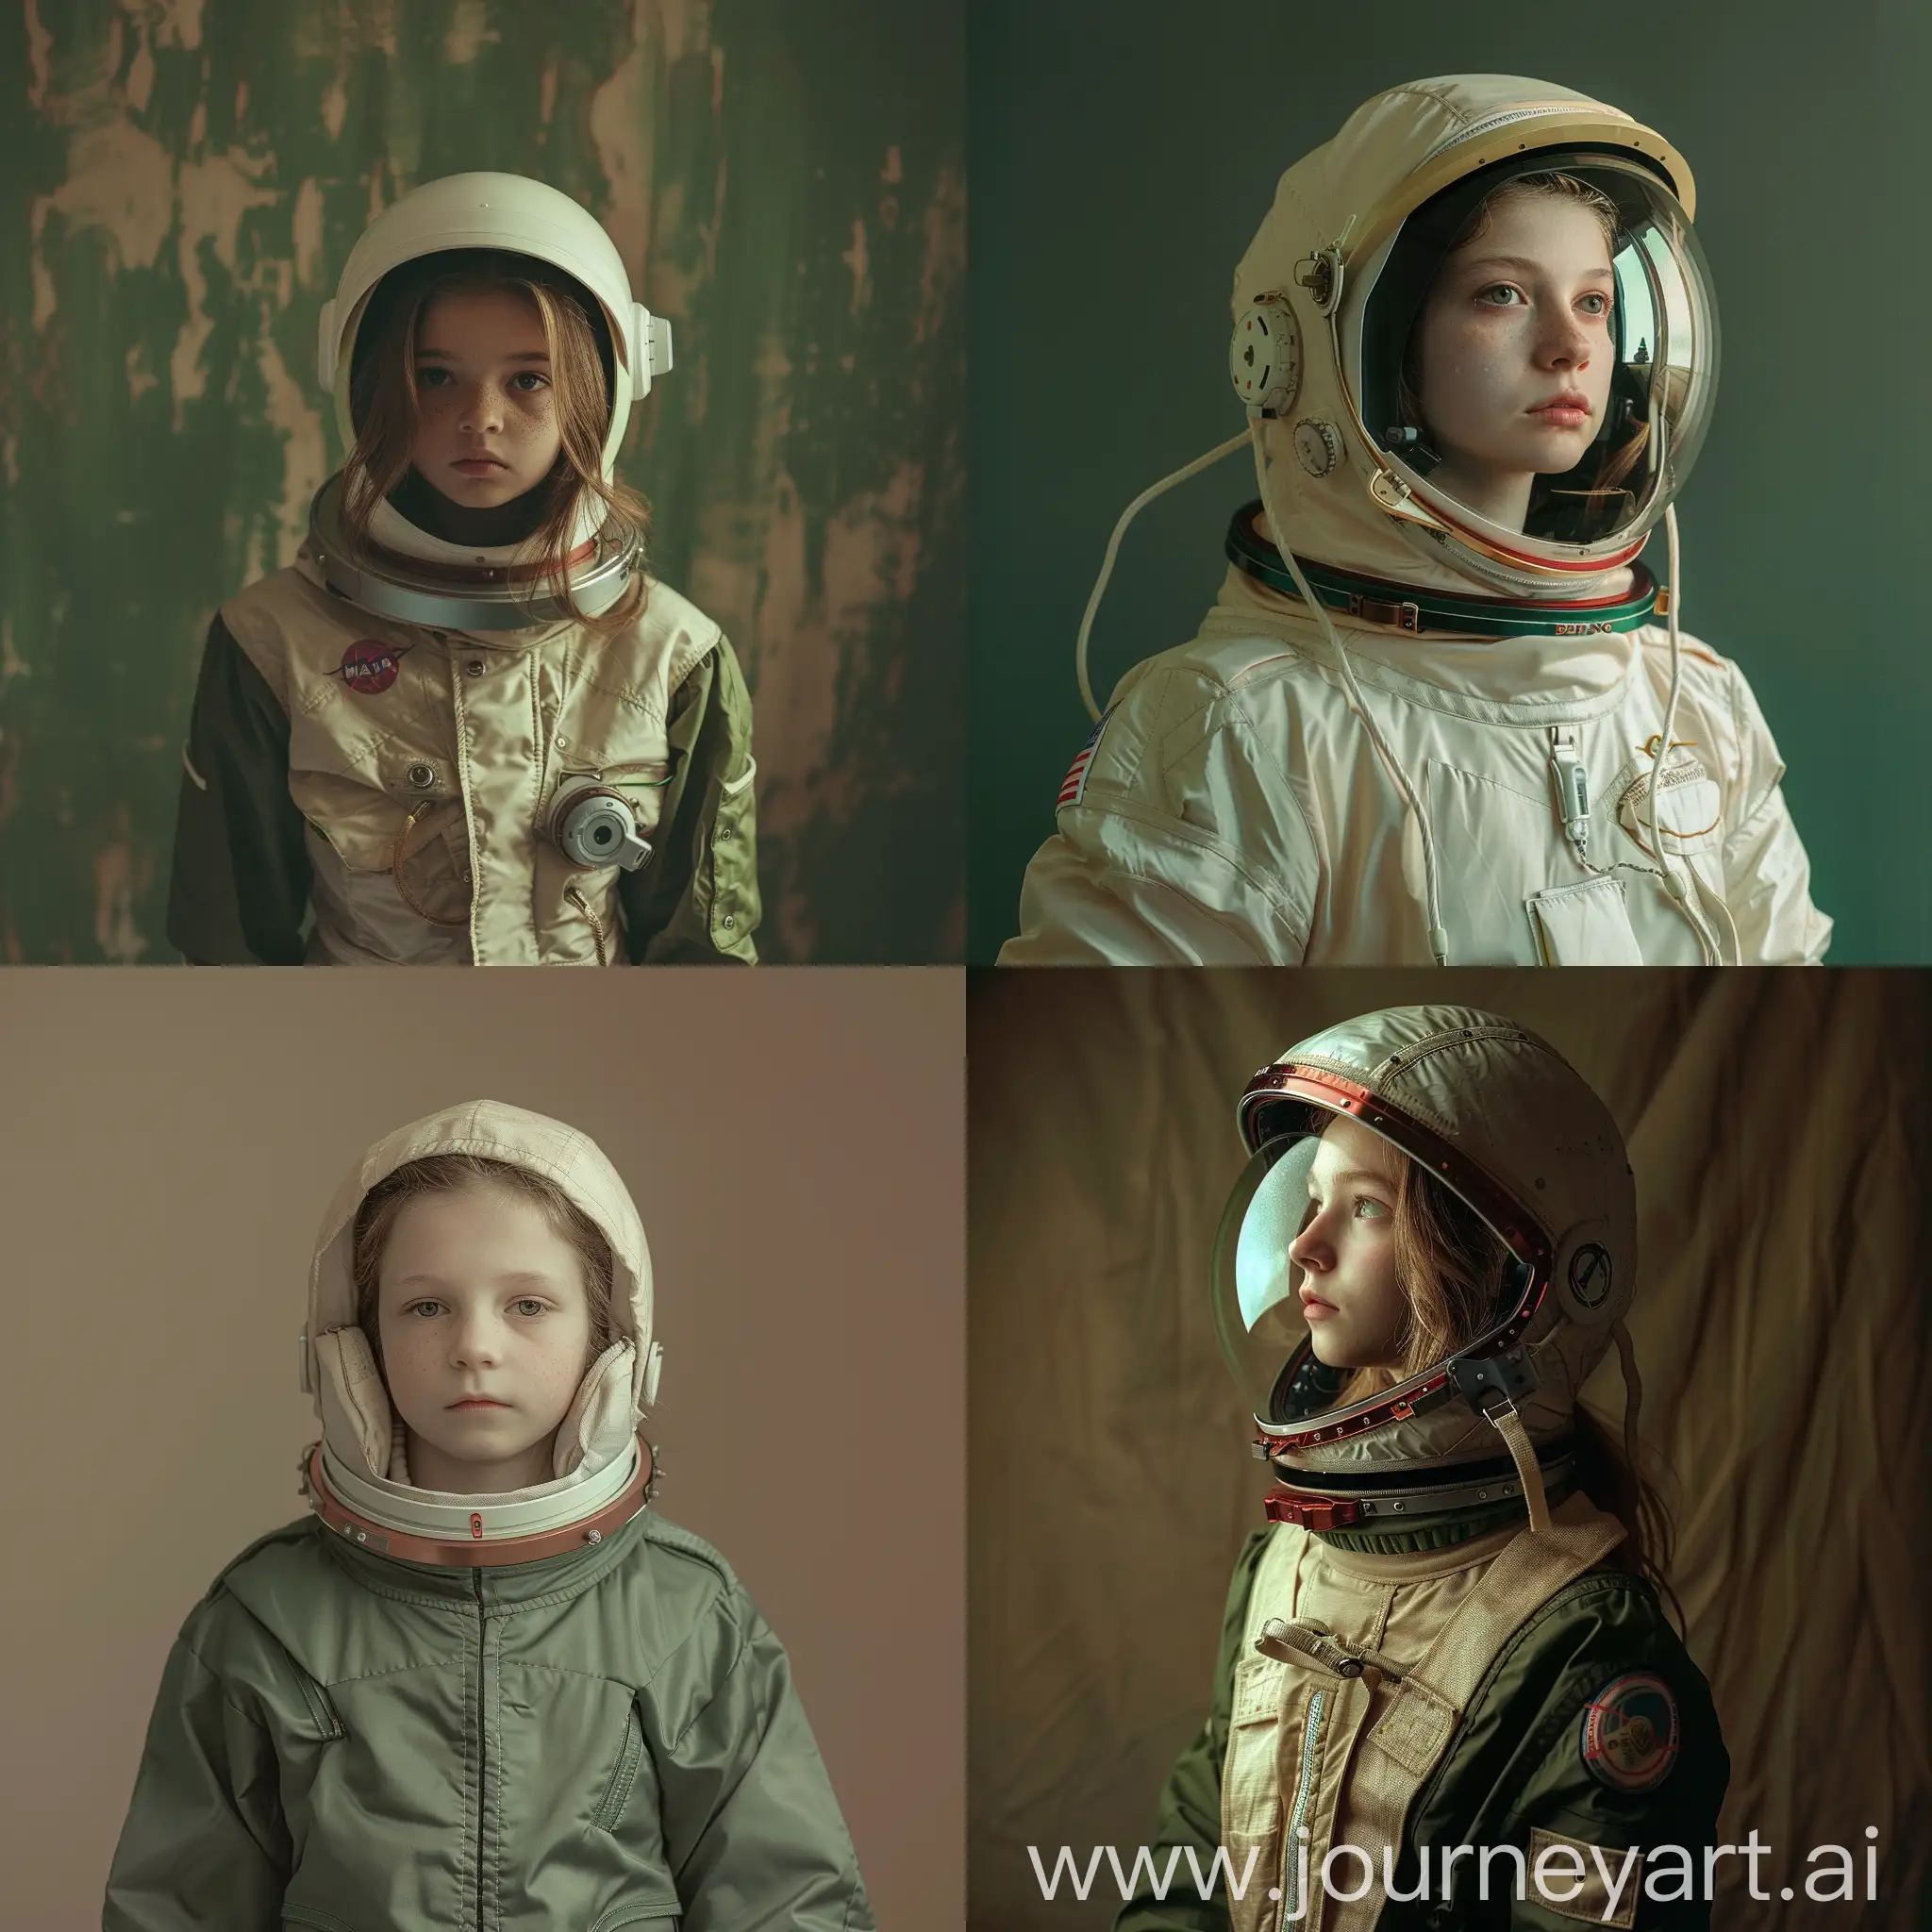 Contemporary-Realism-Portrait-Photography-of-a-Girl-in-a-Spacesuit